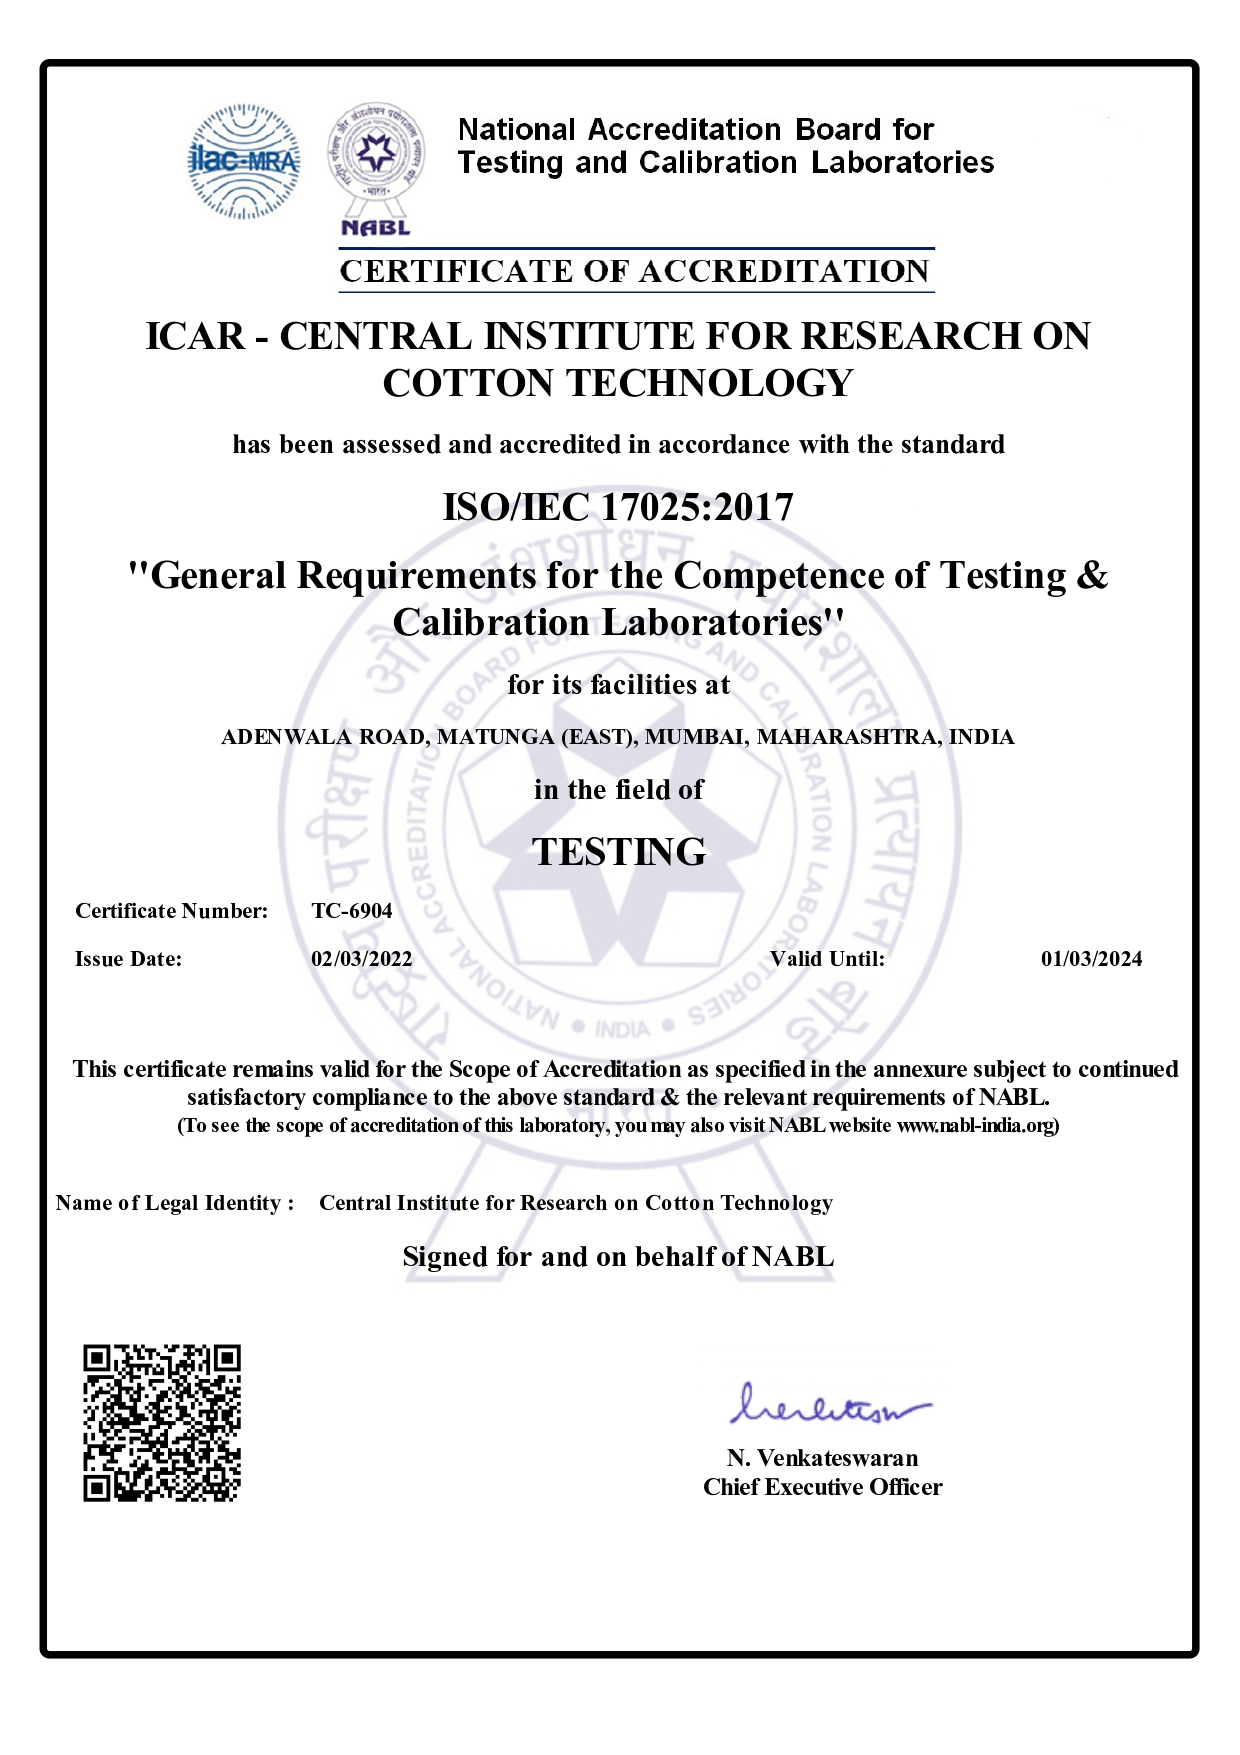 Image of ISO-IEC 17025:2017 Certificate